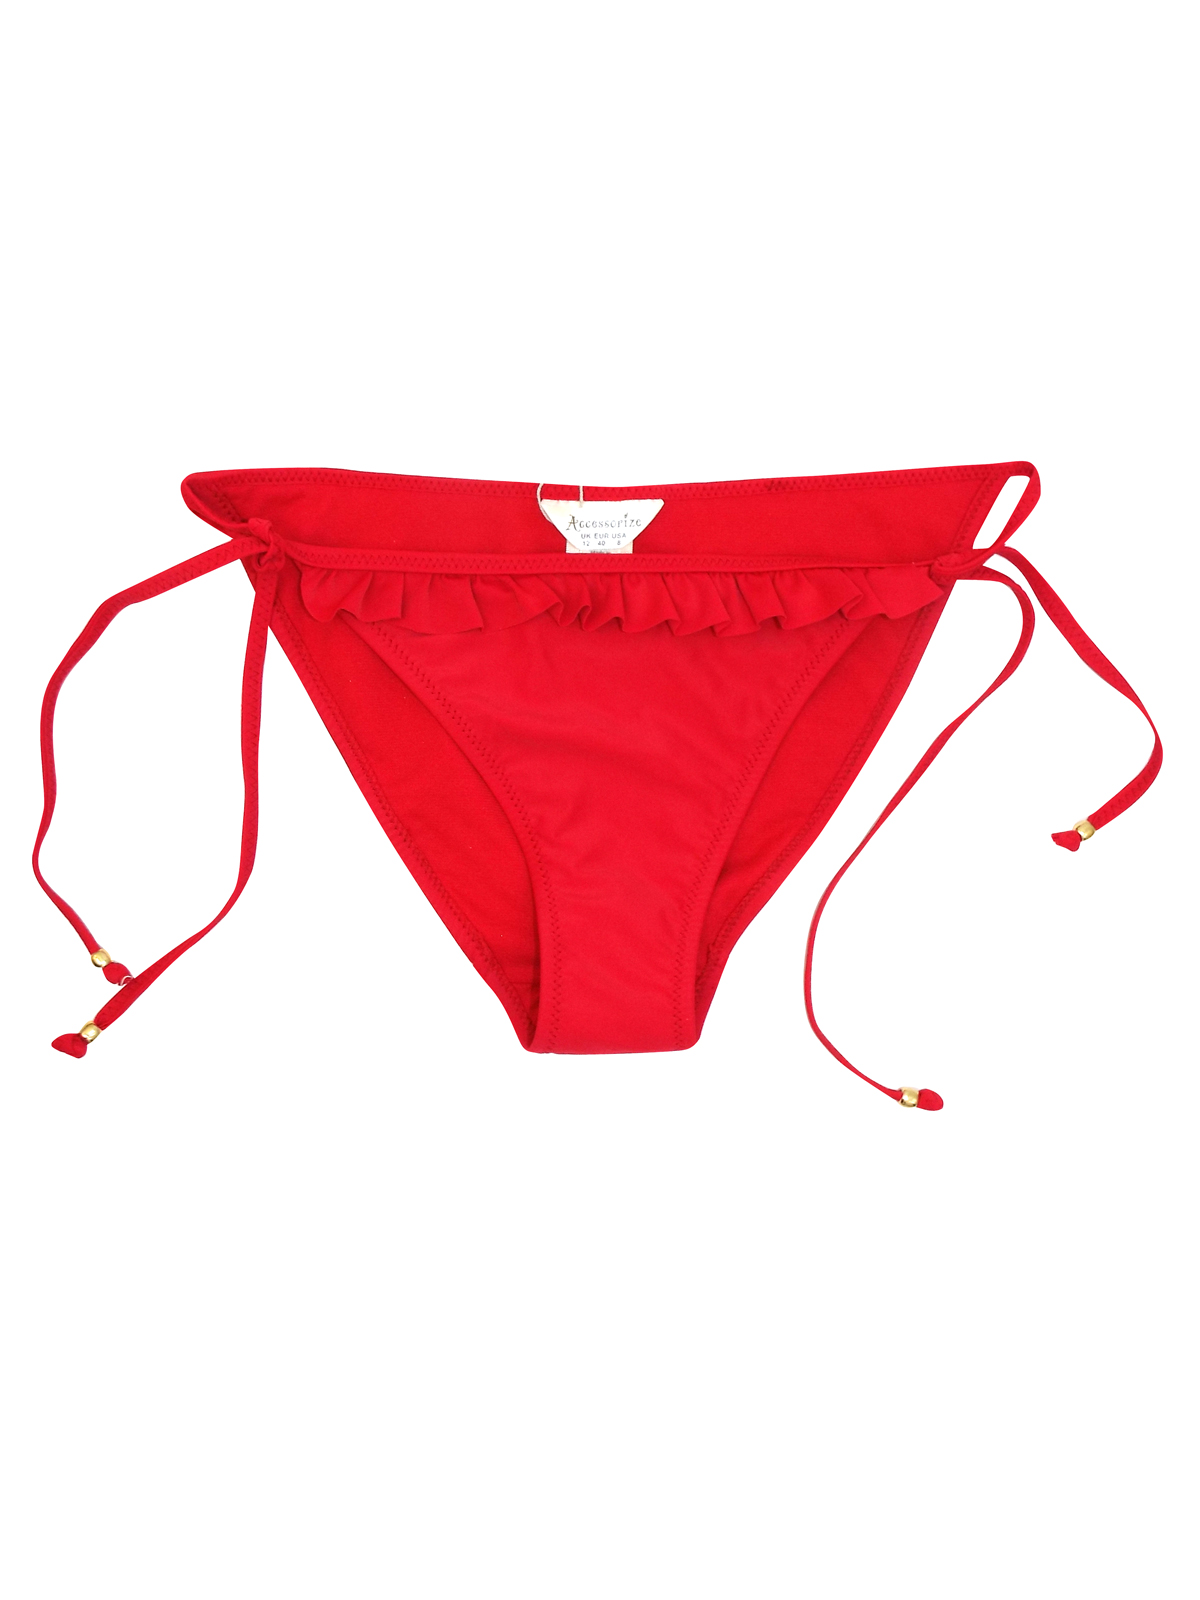 Accessor1ze RED Frill Trim Tie Side Hipster Bikini Bottoms - Size 10 to 18